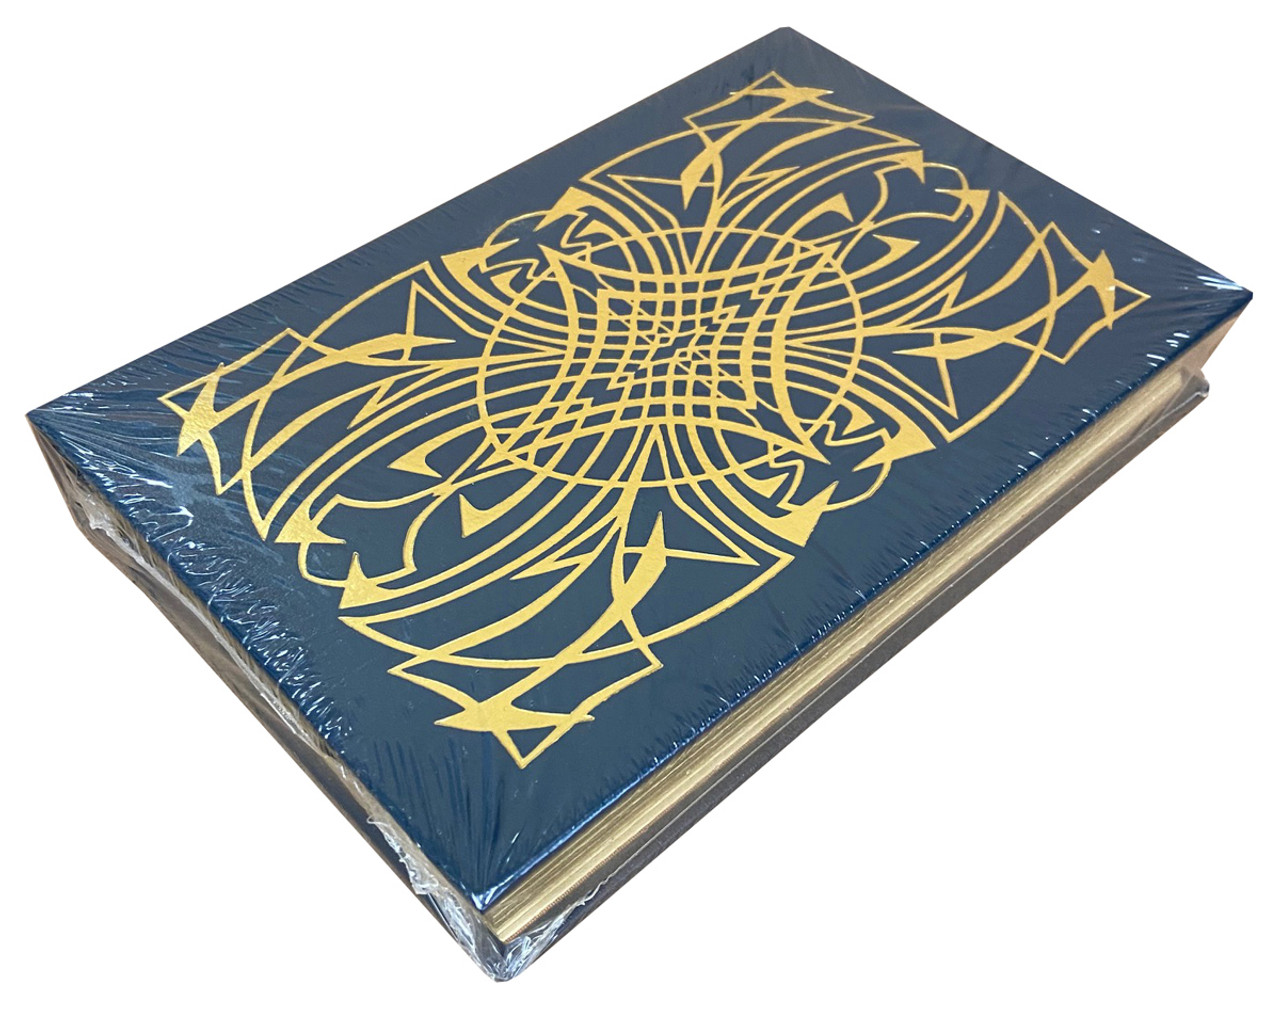 Edgar Rice Burroughs "The Moon Maid" Deluxe Limited Edition, Leather Bound Collector's Edition [Sealed]